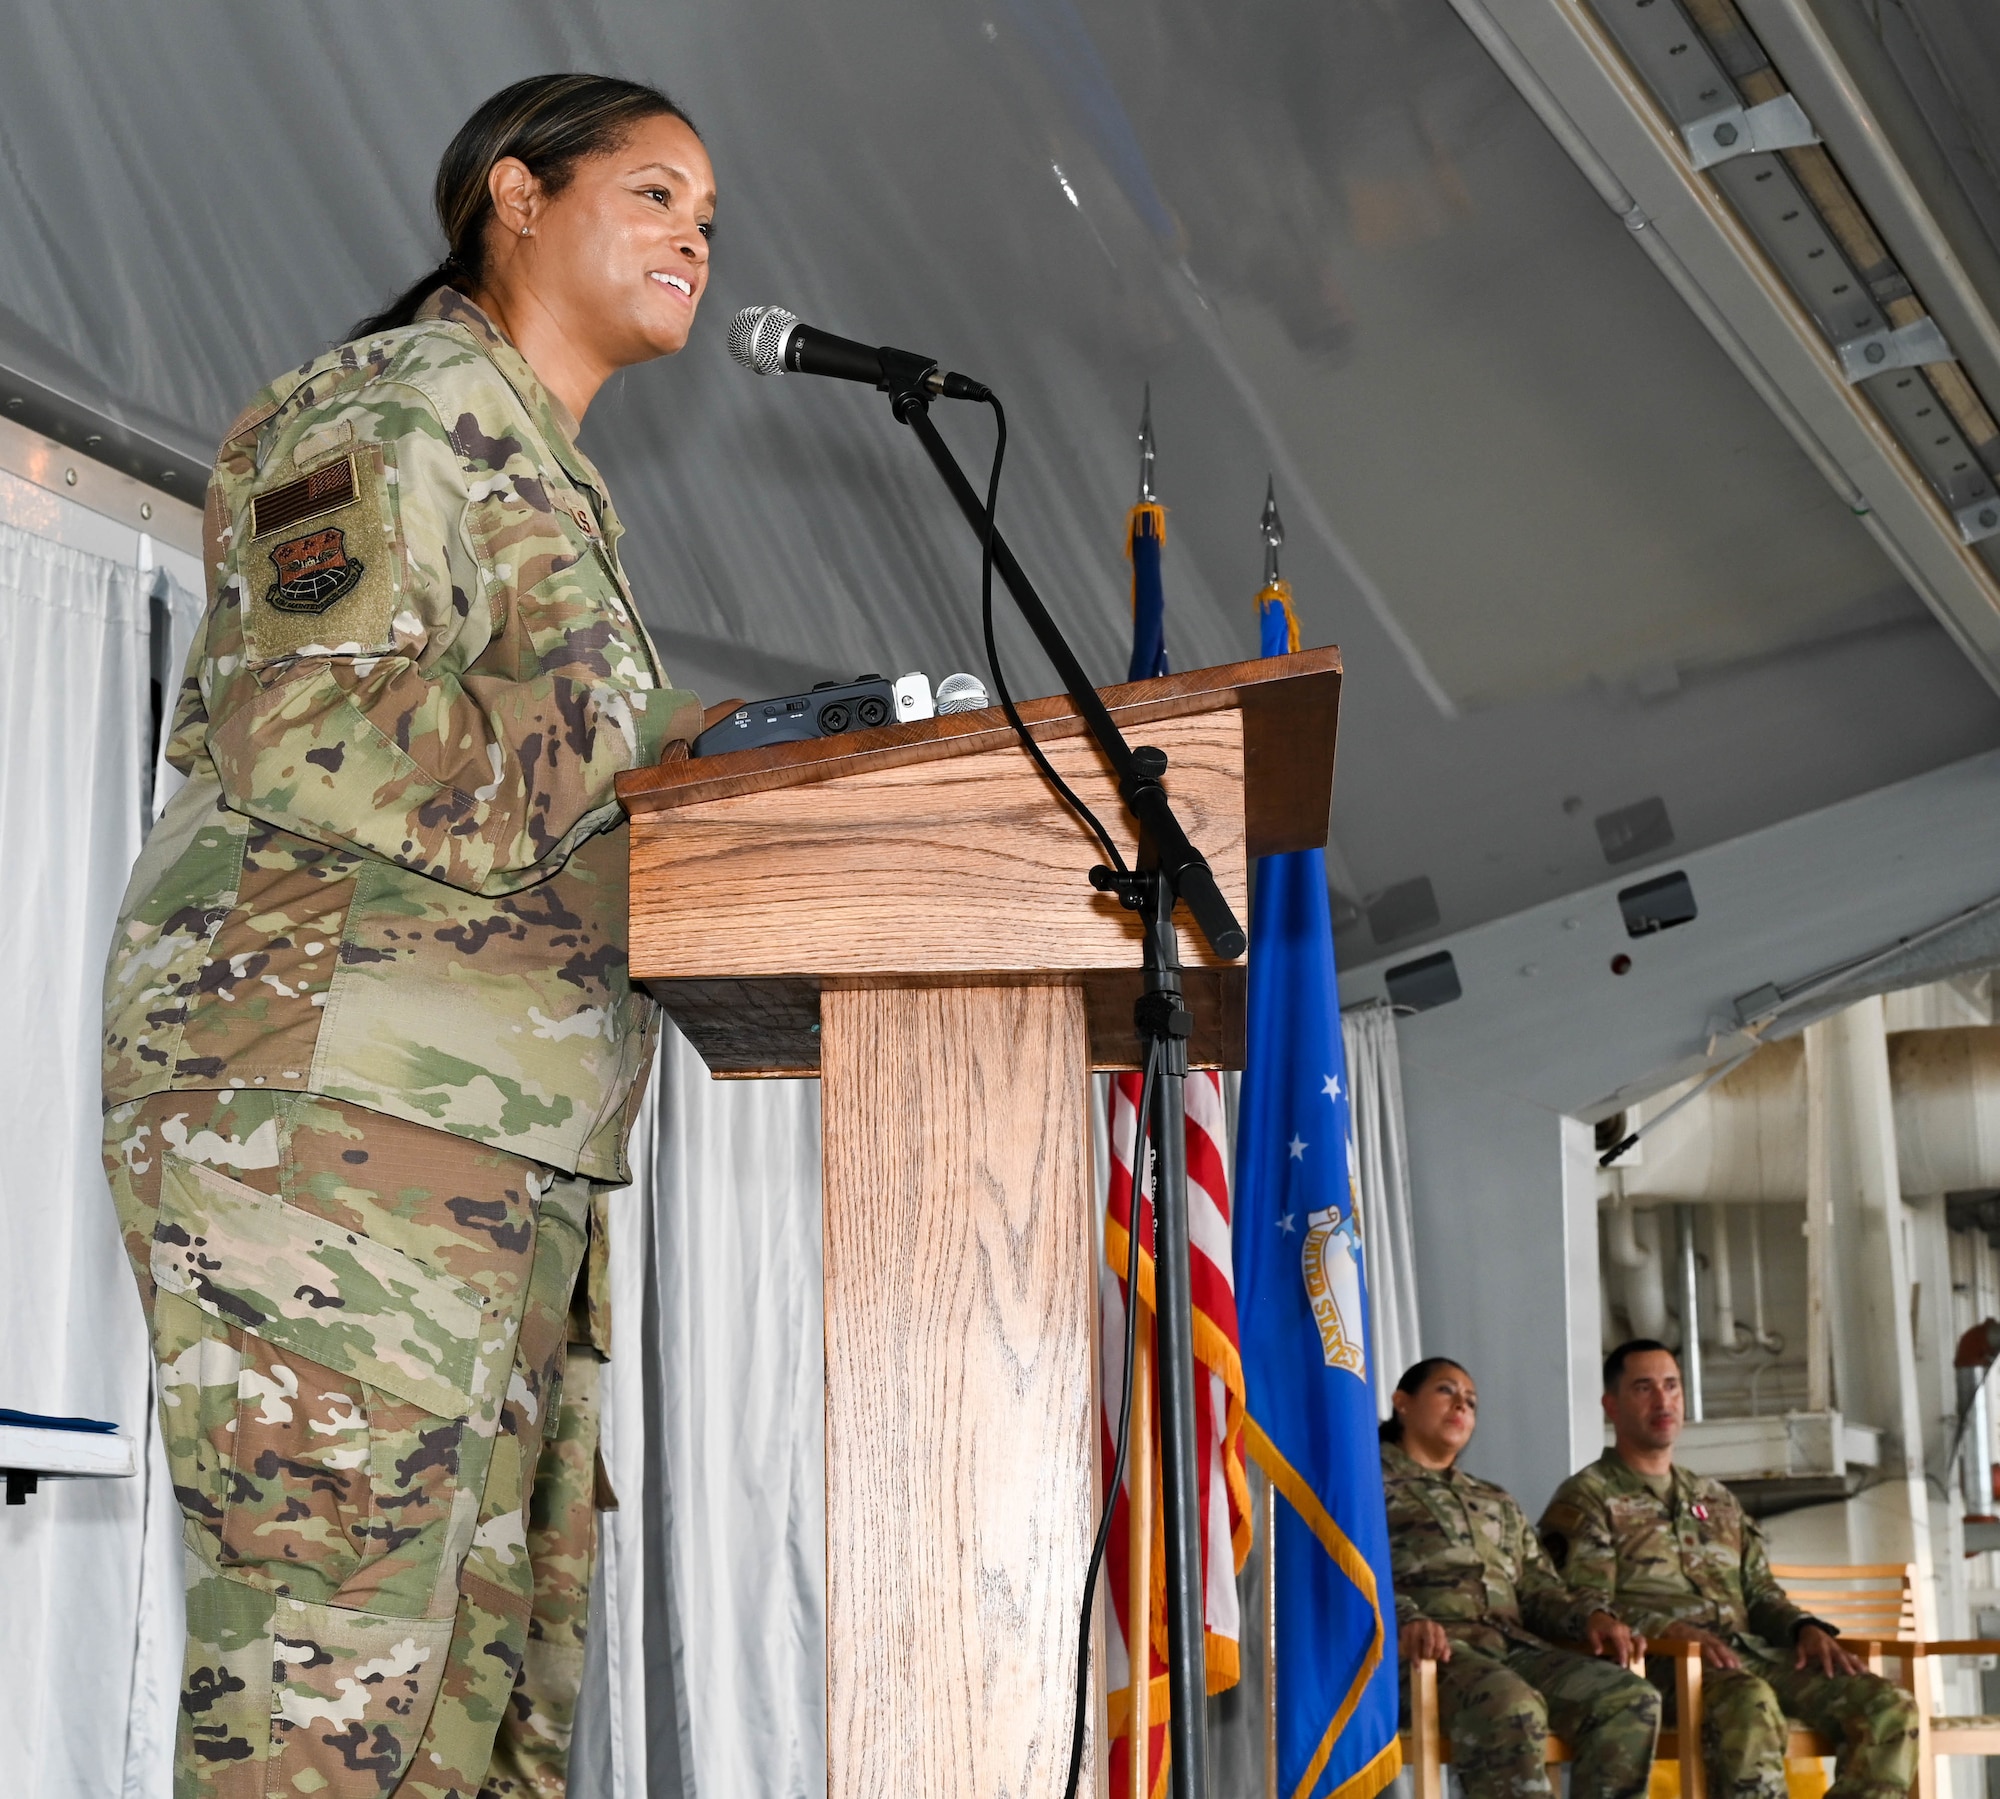 Maj. Yolanda Seals, 433rd Maintenance Squadron commander, speaks to attendees after assuming command during the 433rd MXS change of command ceremony at Joint Base San Antonio-Lackland, Texas, Sept. 10, 2022. The 433rd MXS mission is to provide essential on and off-equipment repair and support maintenance for all assigned C-5M Super Galaxy aircraft. (U.S. Air Force photo by Airman 1st Class Mark Colmenares)